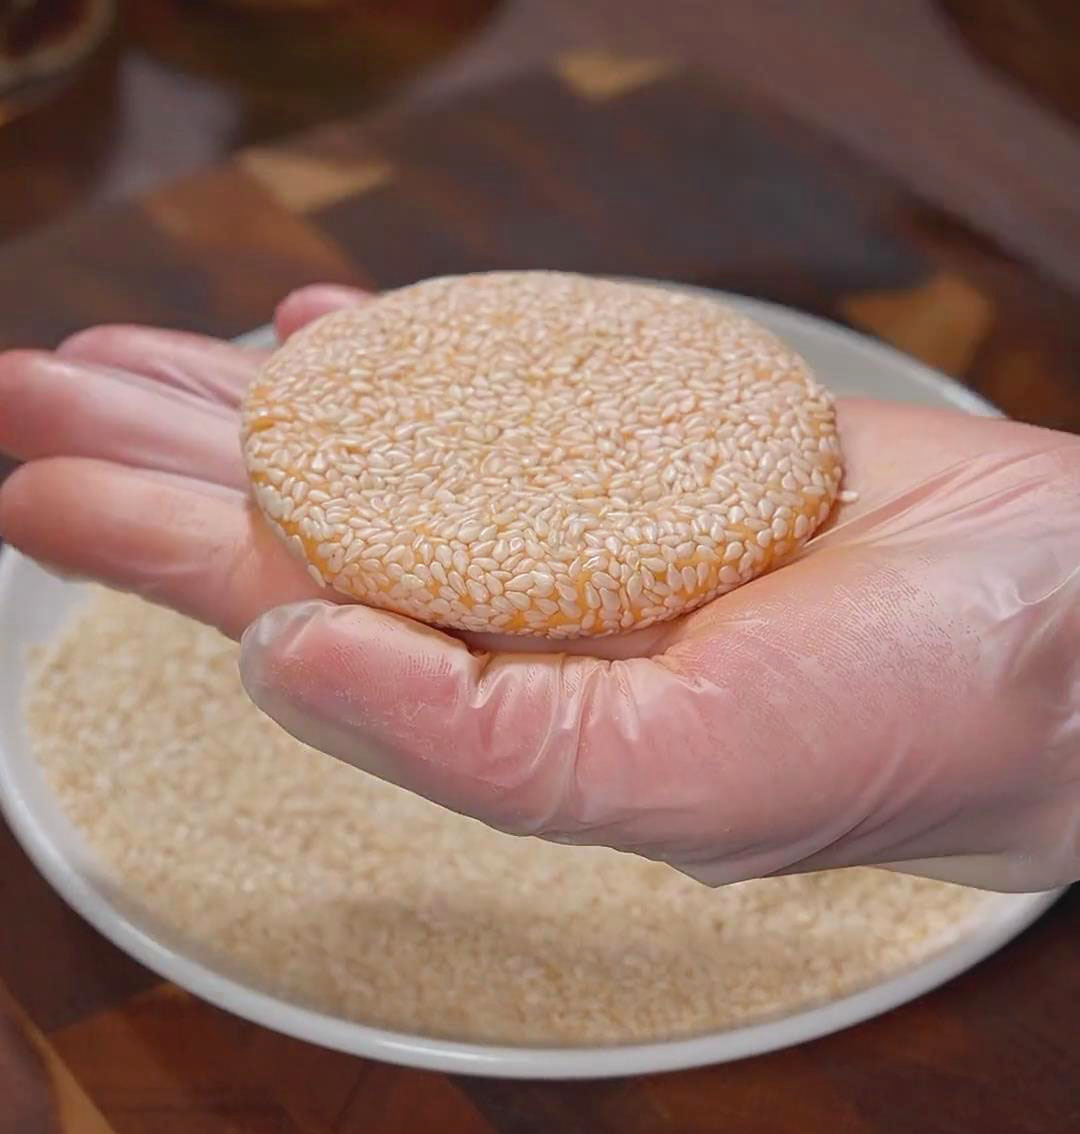 Coat each side of the pancake with white sesame seeds